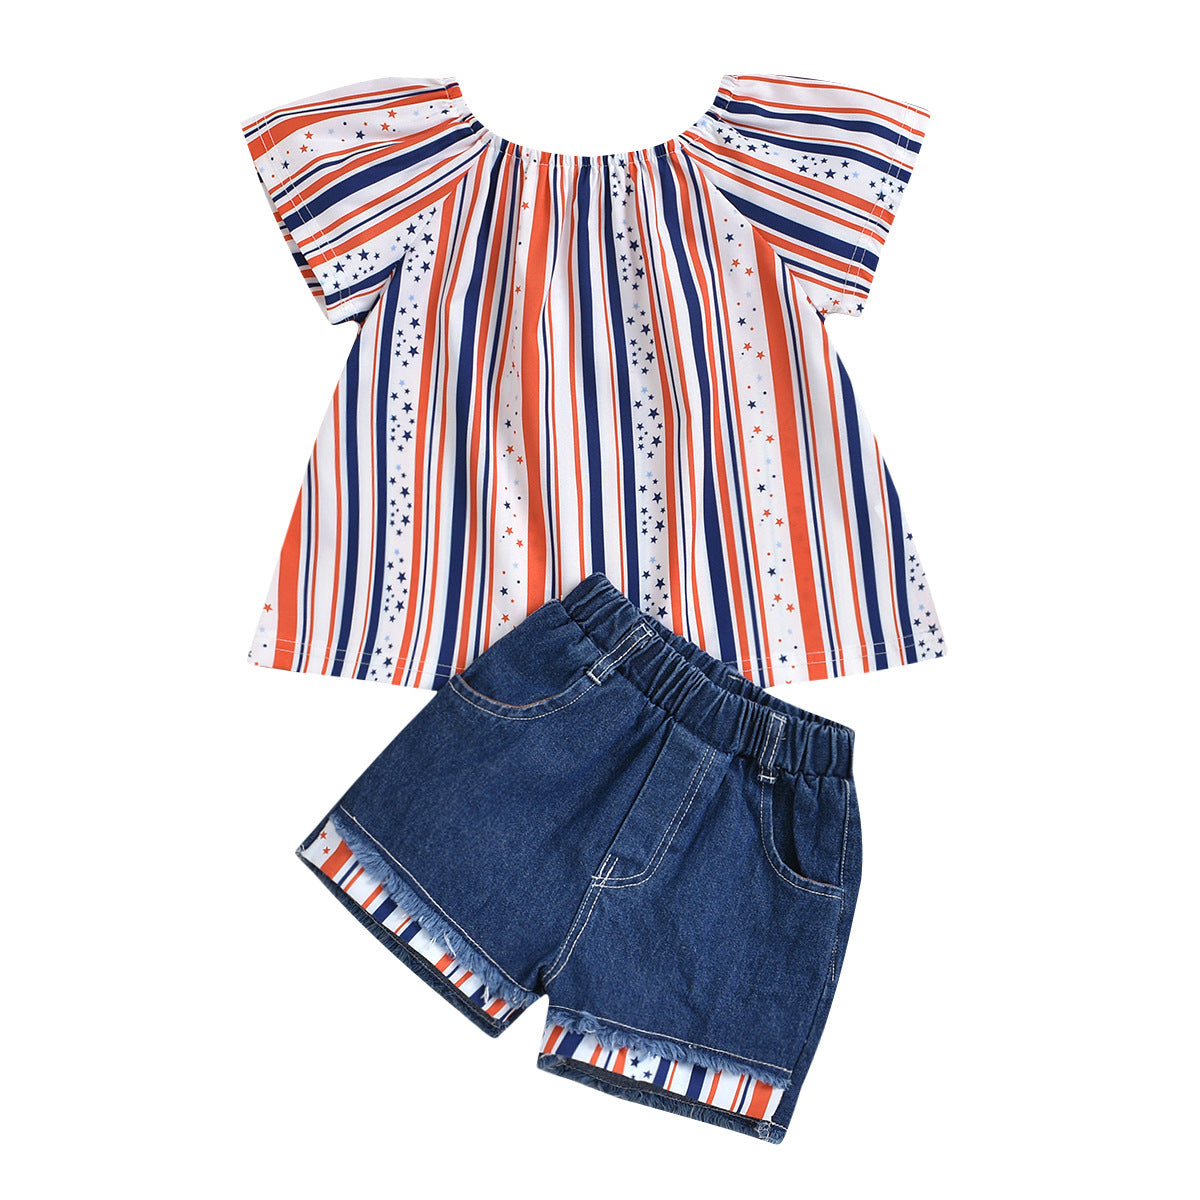 Summer 1-6 Years Old Girls' Independence Day Short-Sleeved Striped Top + Denim Stitching Shorts 2-Piece Set Wholesale Kids Clothing